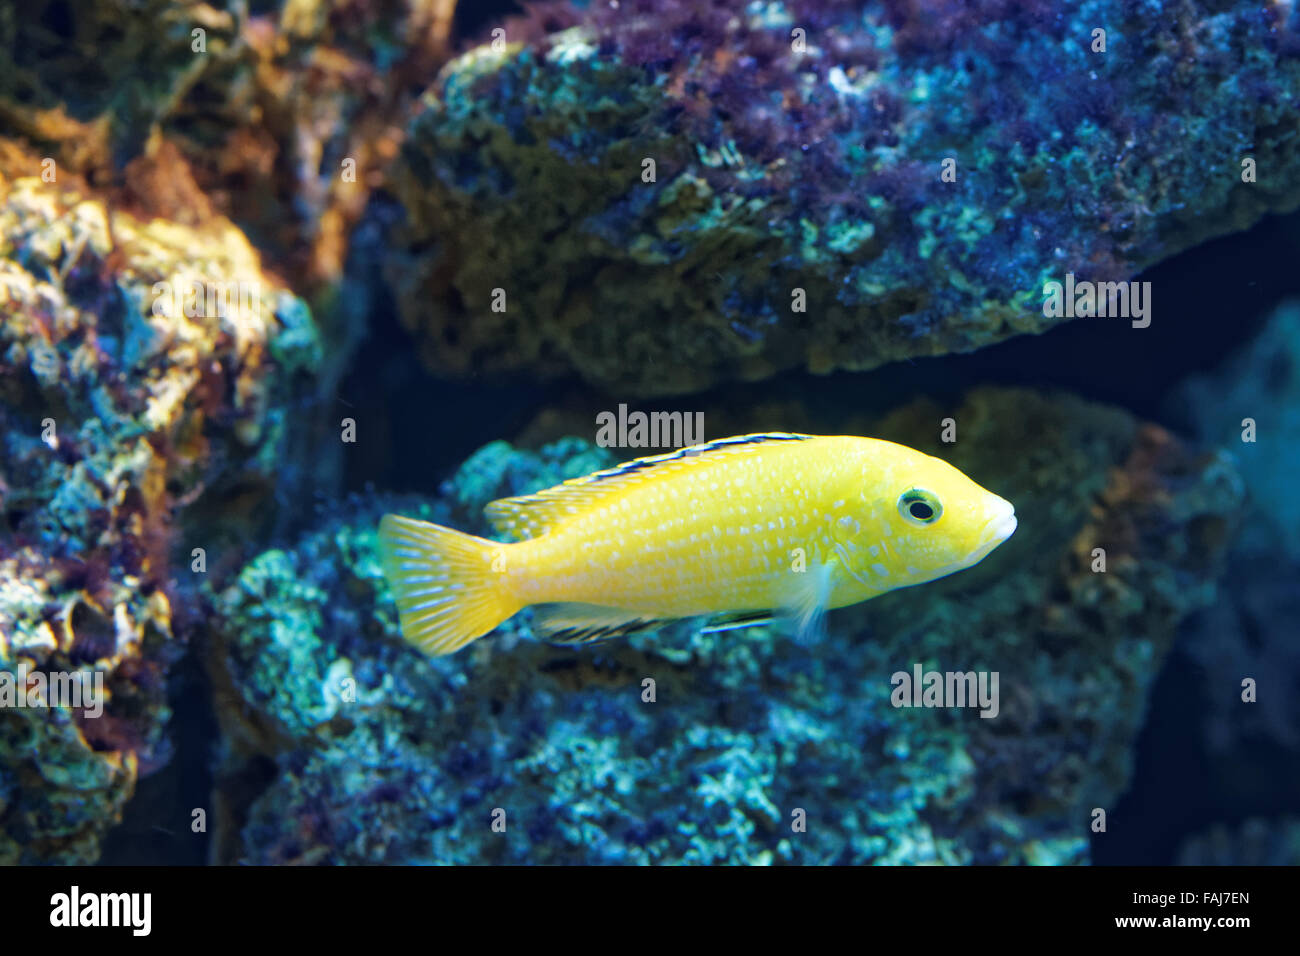 Gephyrochromis moorii is a species of fish in the Cichlidae family. Stock Photo